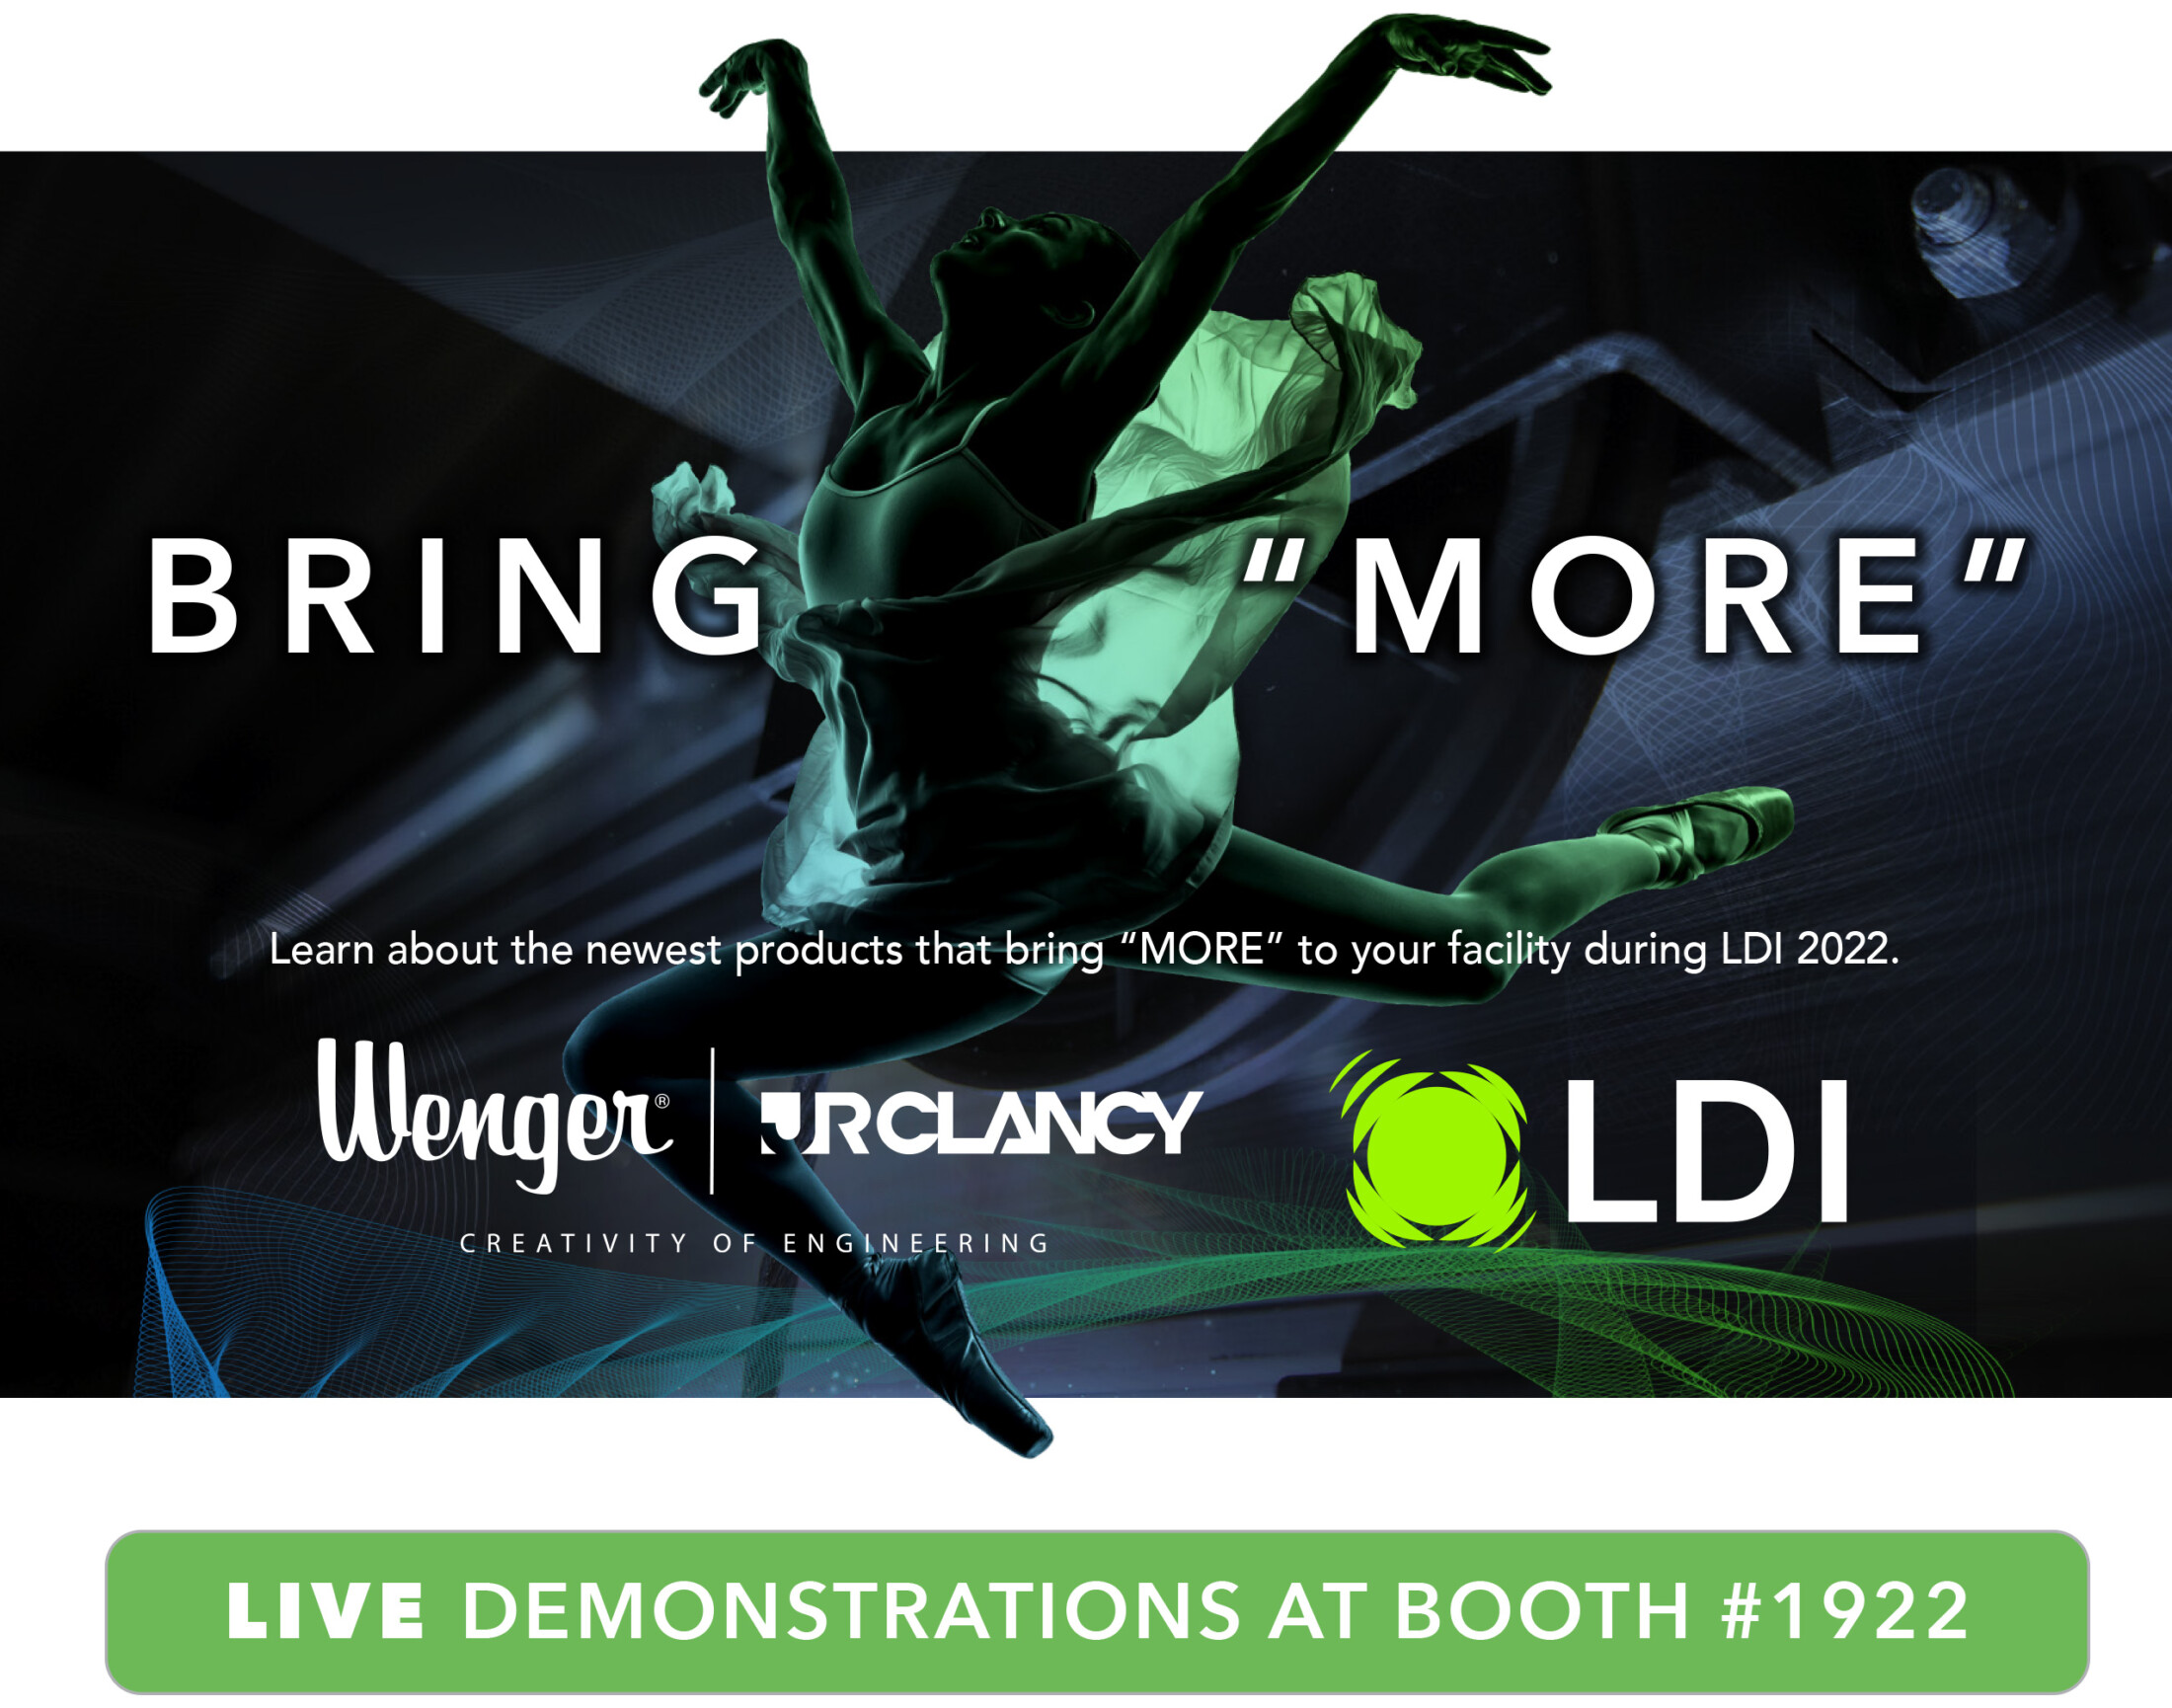 BRING MORE - Learn about the newest products that bring MORE to your facility during LDI 2022. LIVE DEMONSTRATIONS AT BOOTH #1922